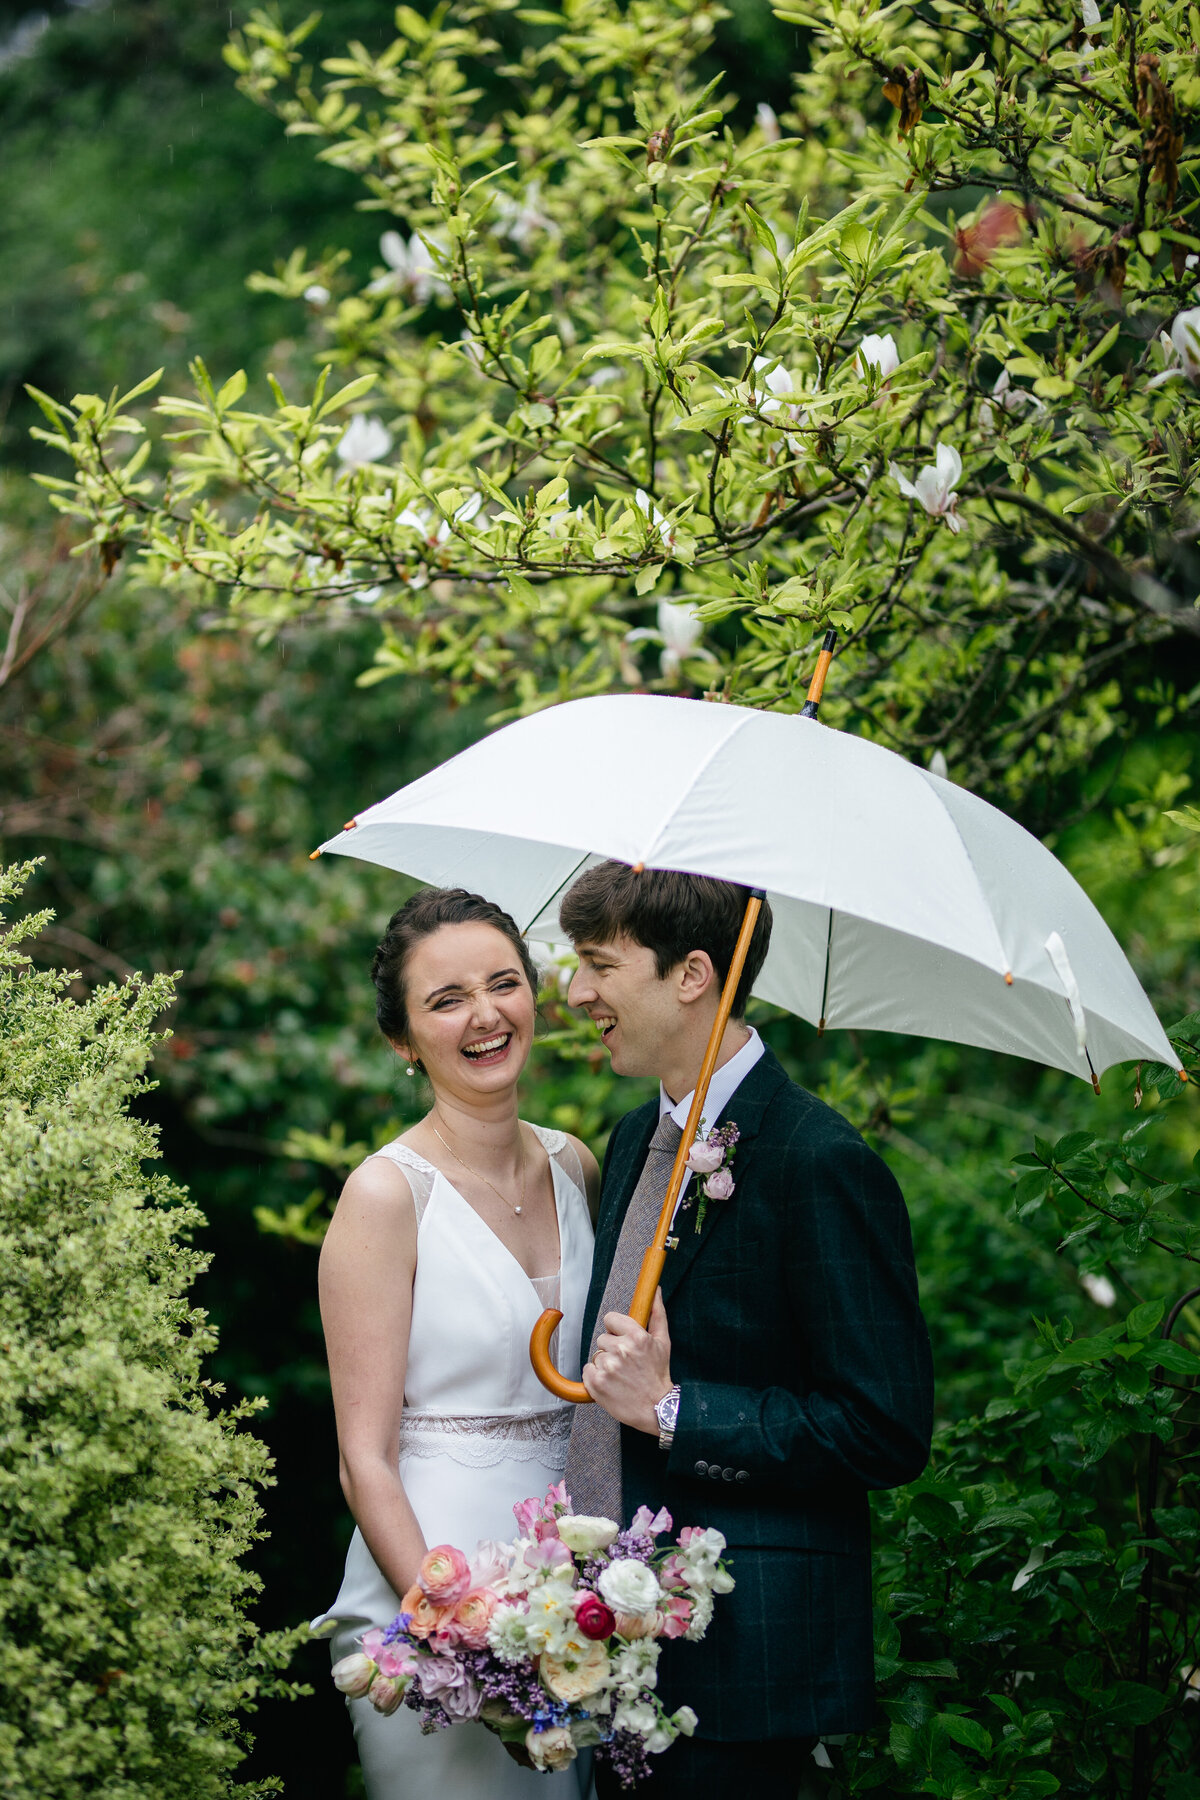 bride and groom pose under umbrella for thier wedding photographer during the rain